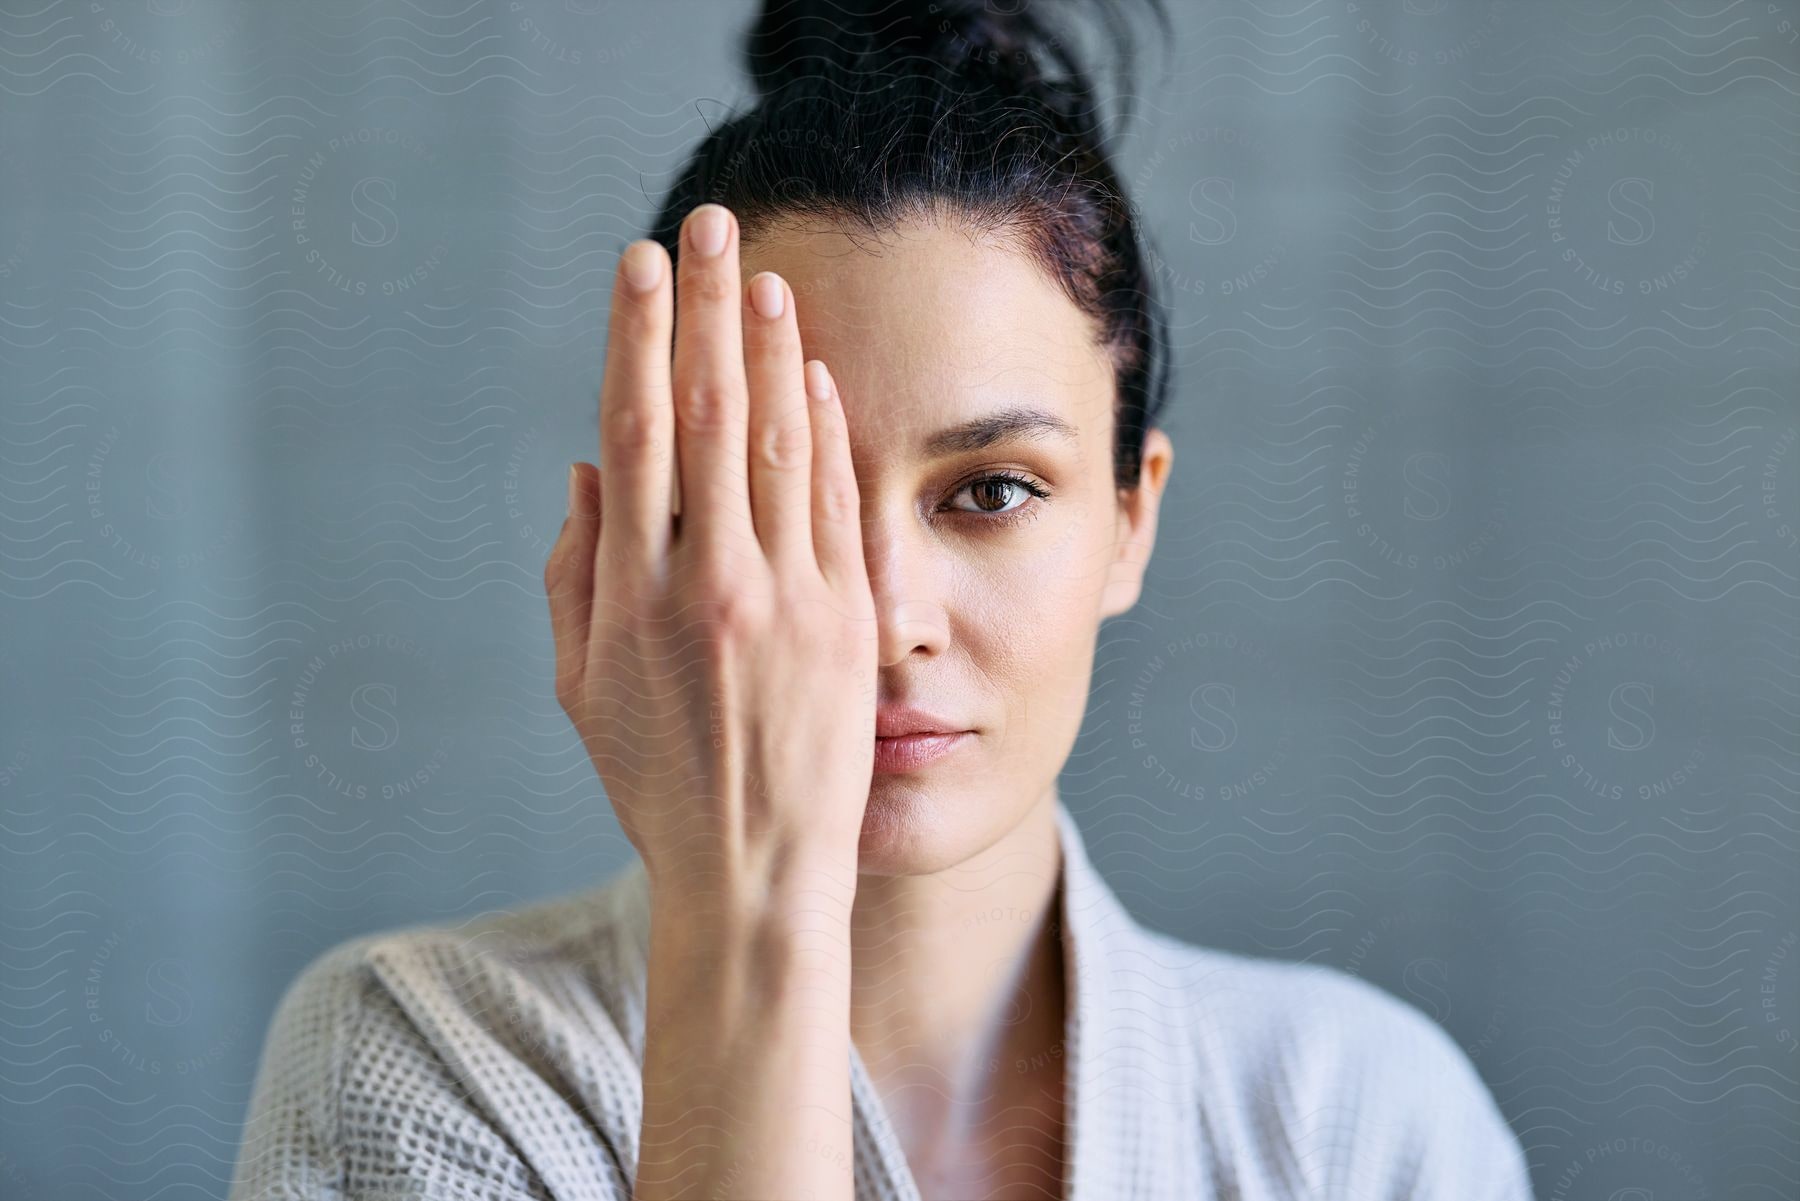 A woman with a bun hairstyle covers half of her face with one hand, gazing pensively to the side.